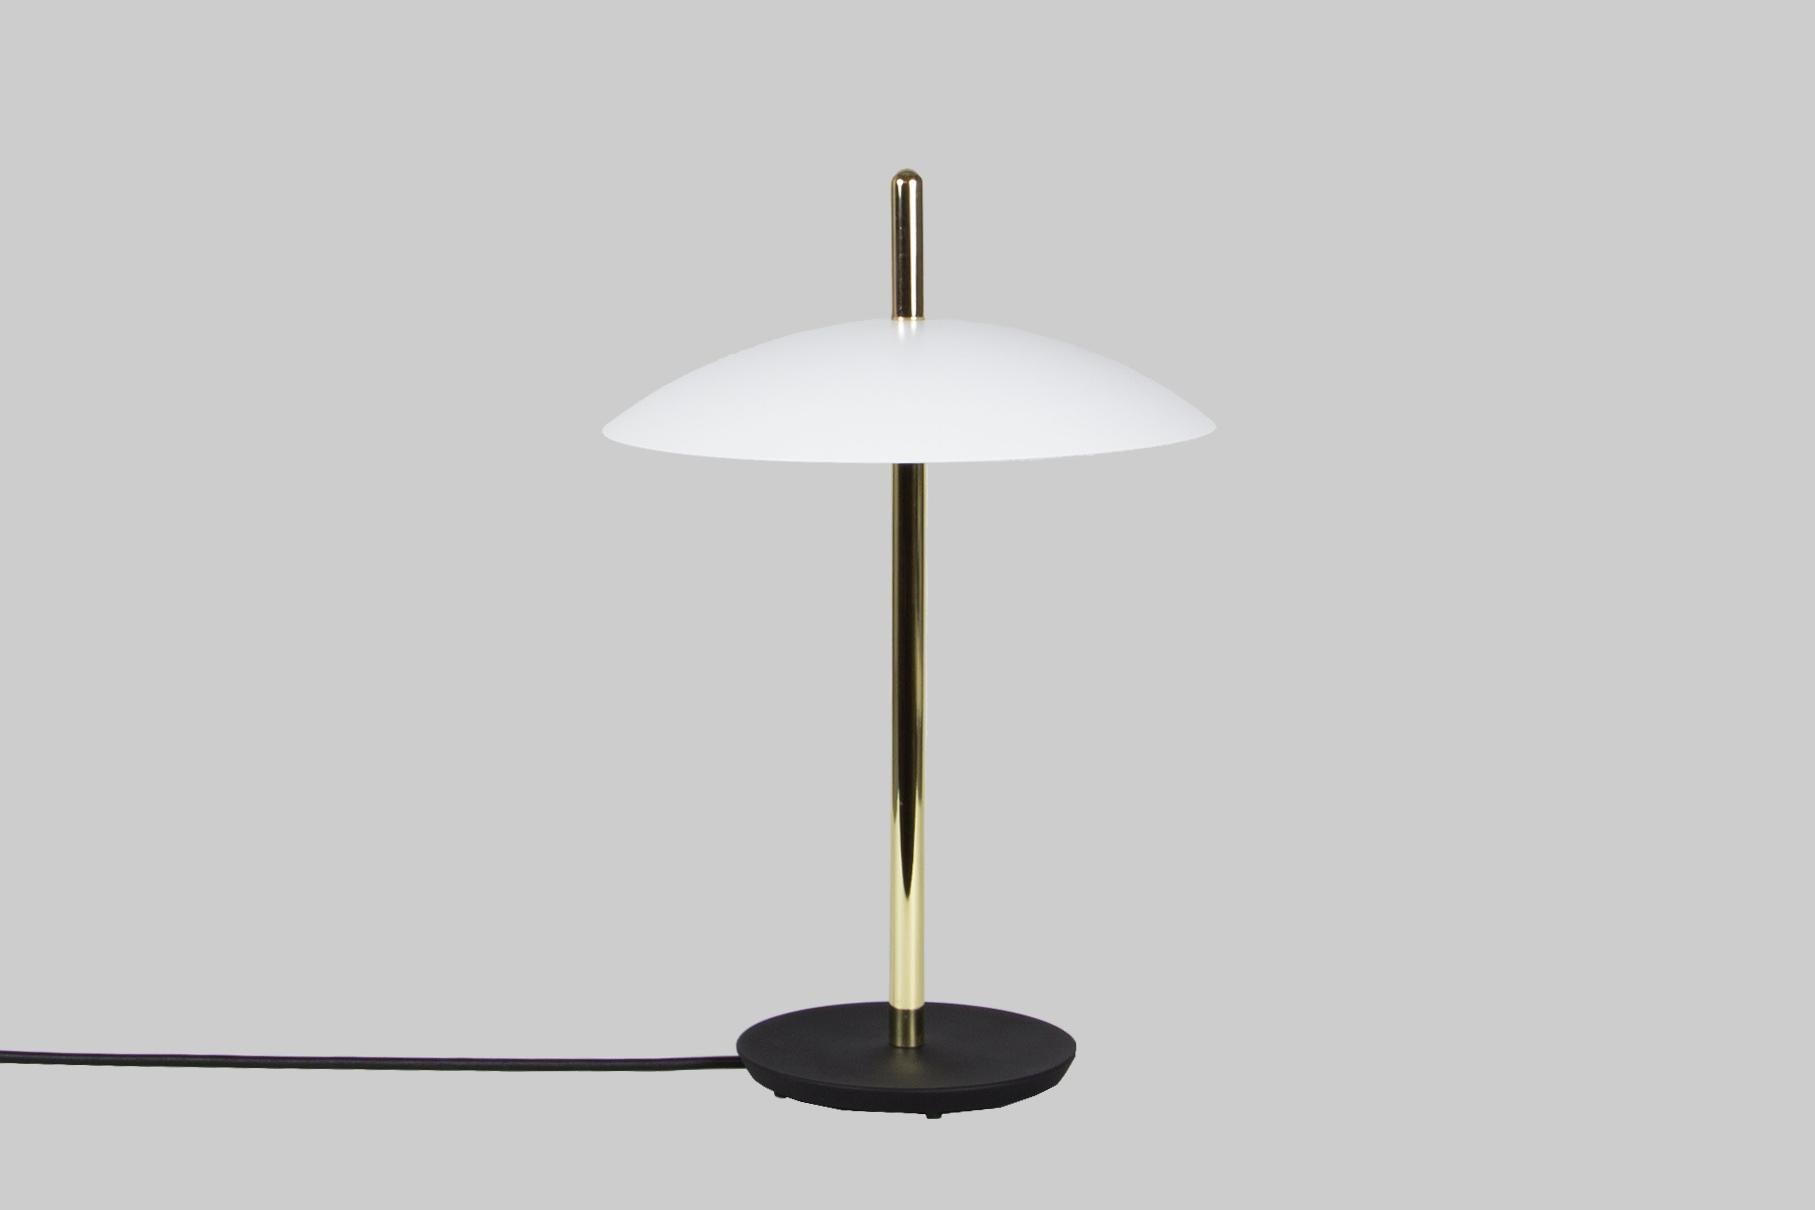 Powder-Coated Pair of Signal Table Lamp from Souda, Black and Brass, Made to Order For Sale